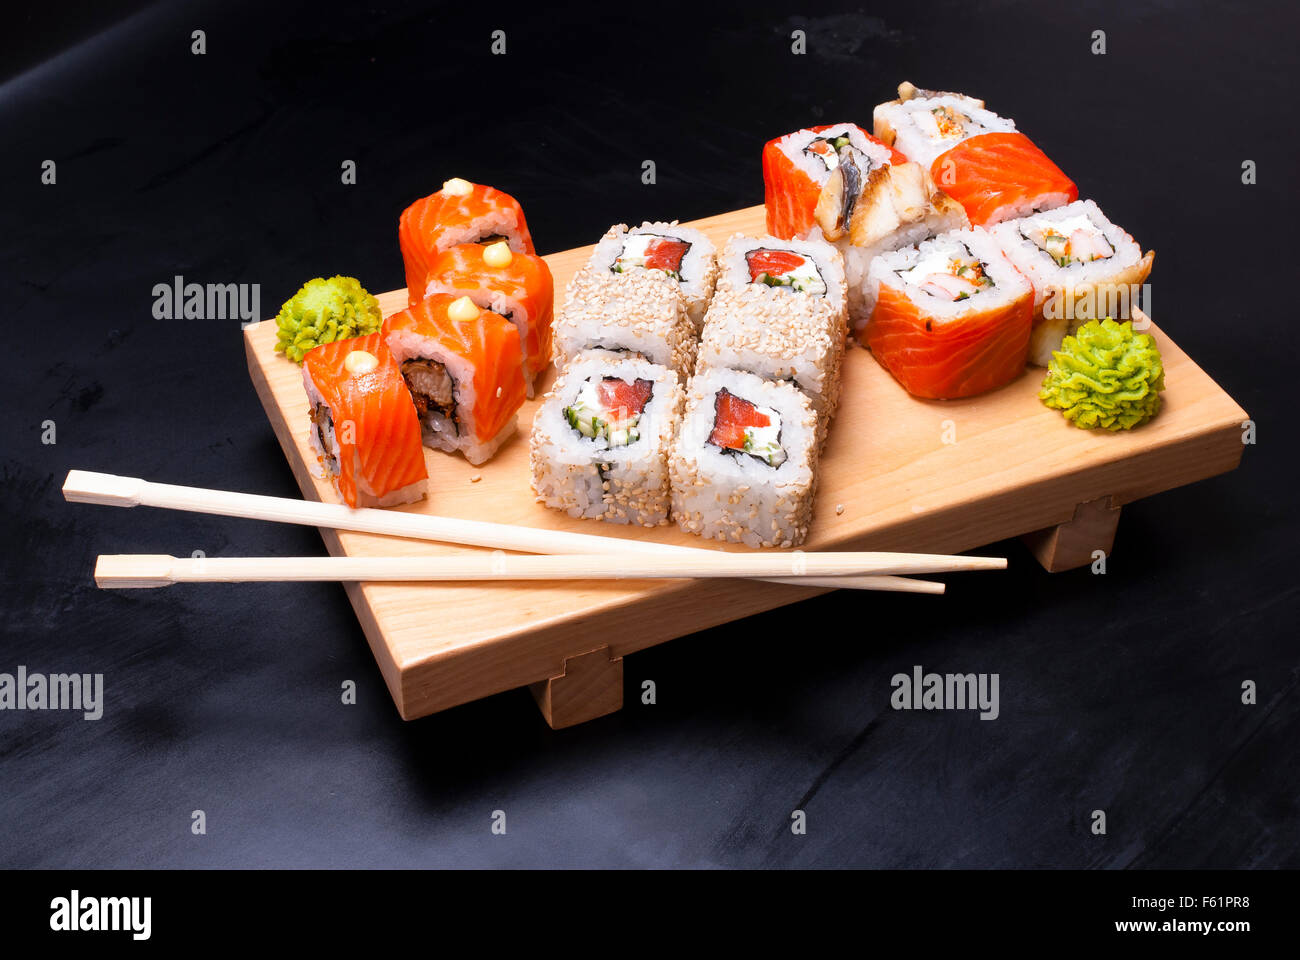 Sushi roll set the board on a black background Stock Photo